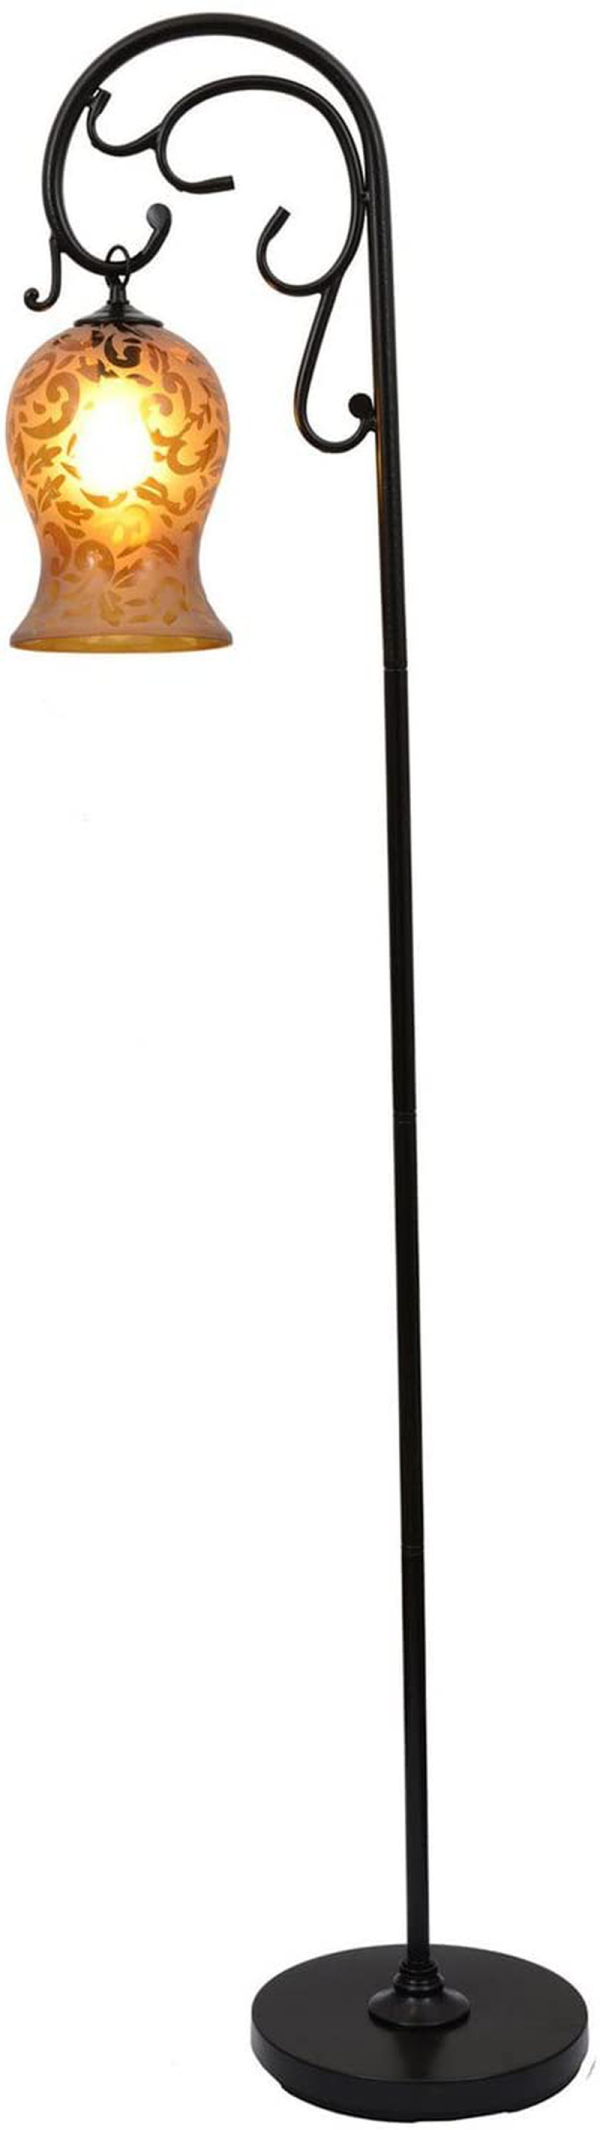 Décor Therapy 64 inch Textured Bronze Floor Lamp with Mercury Glass Globe, 64", Brown